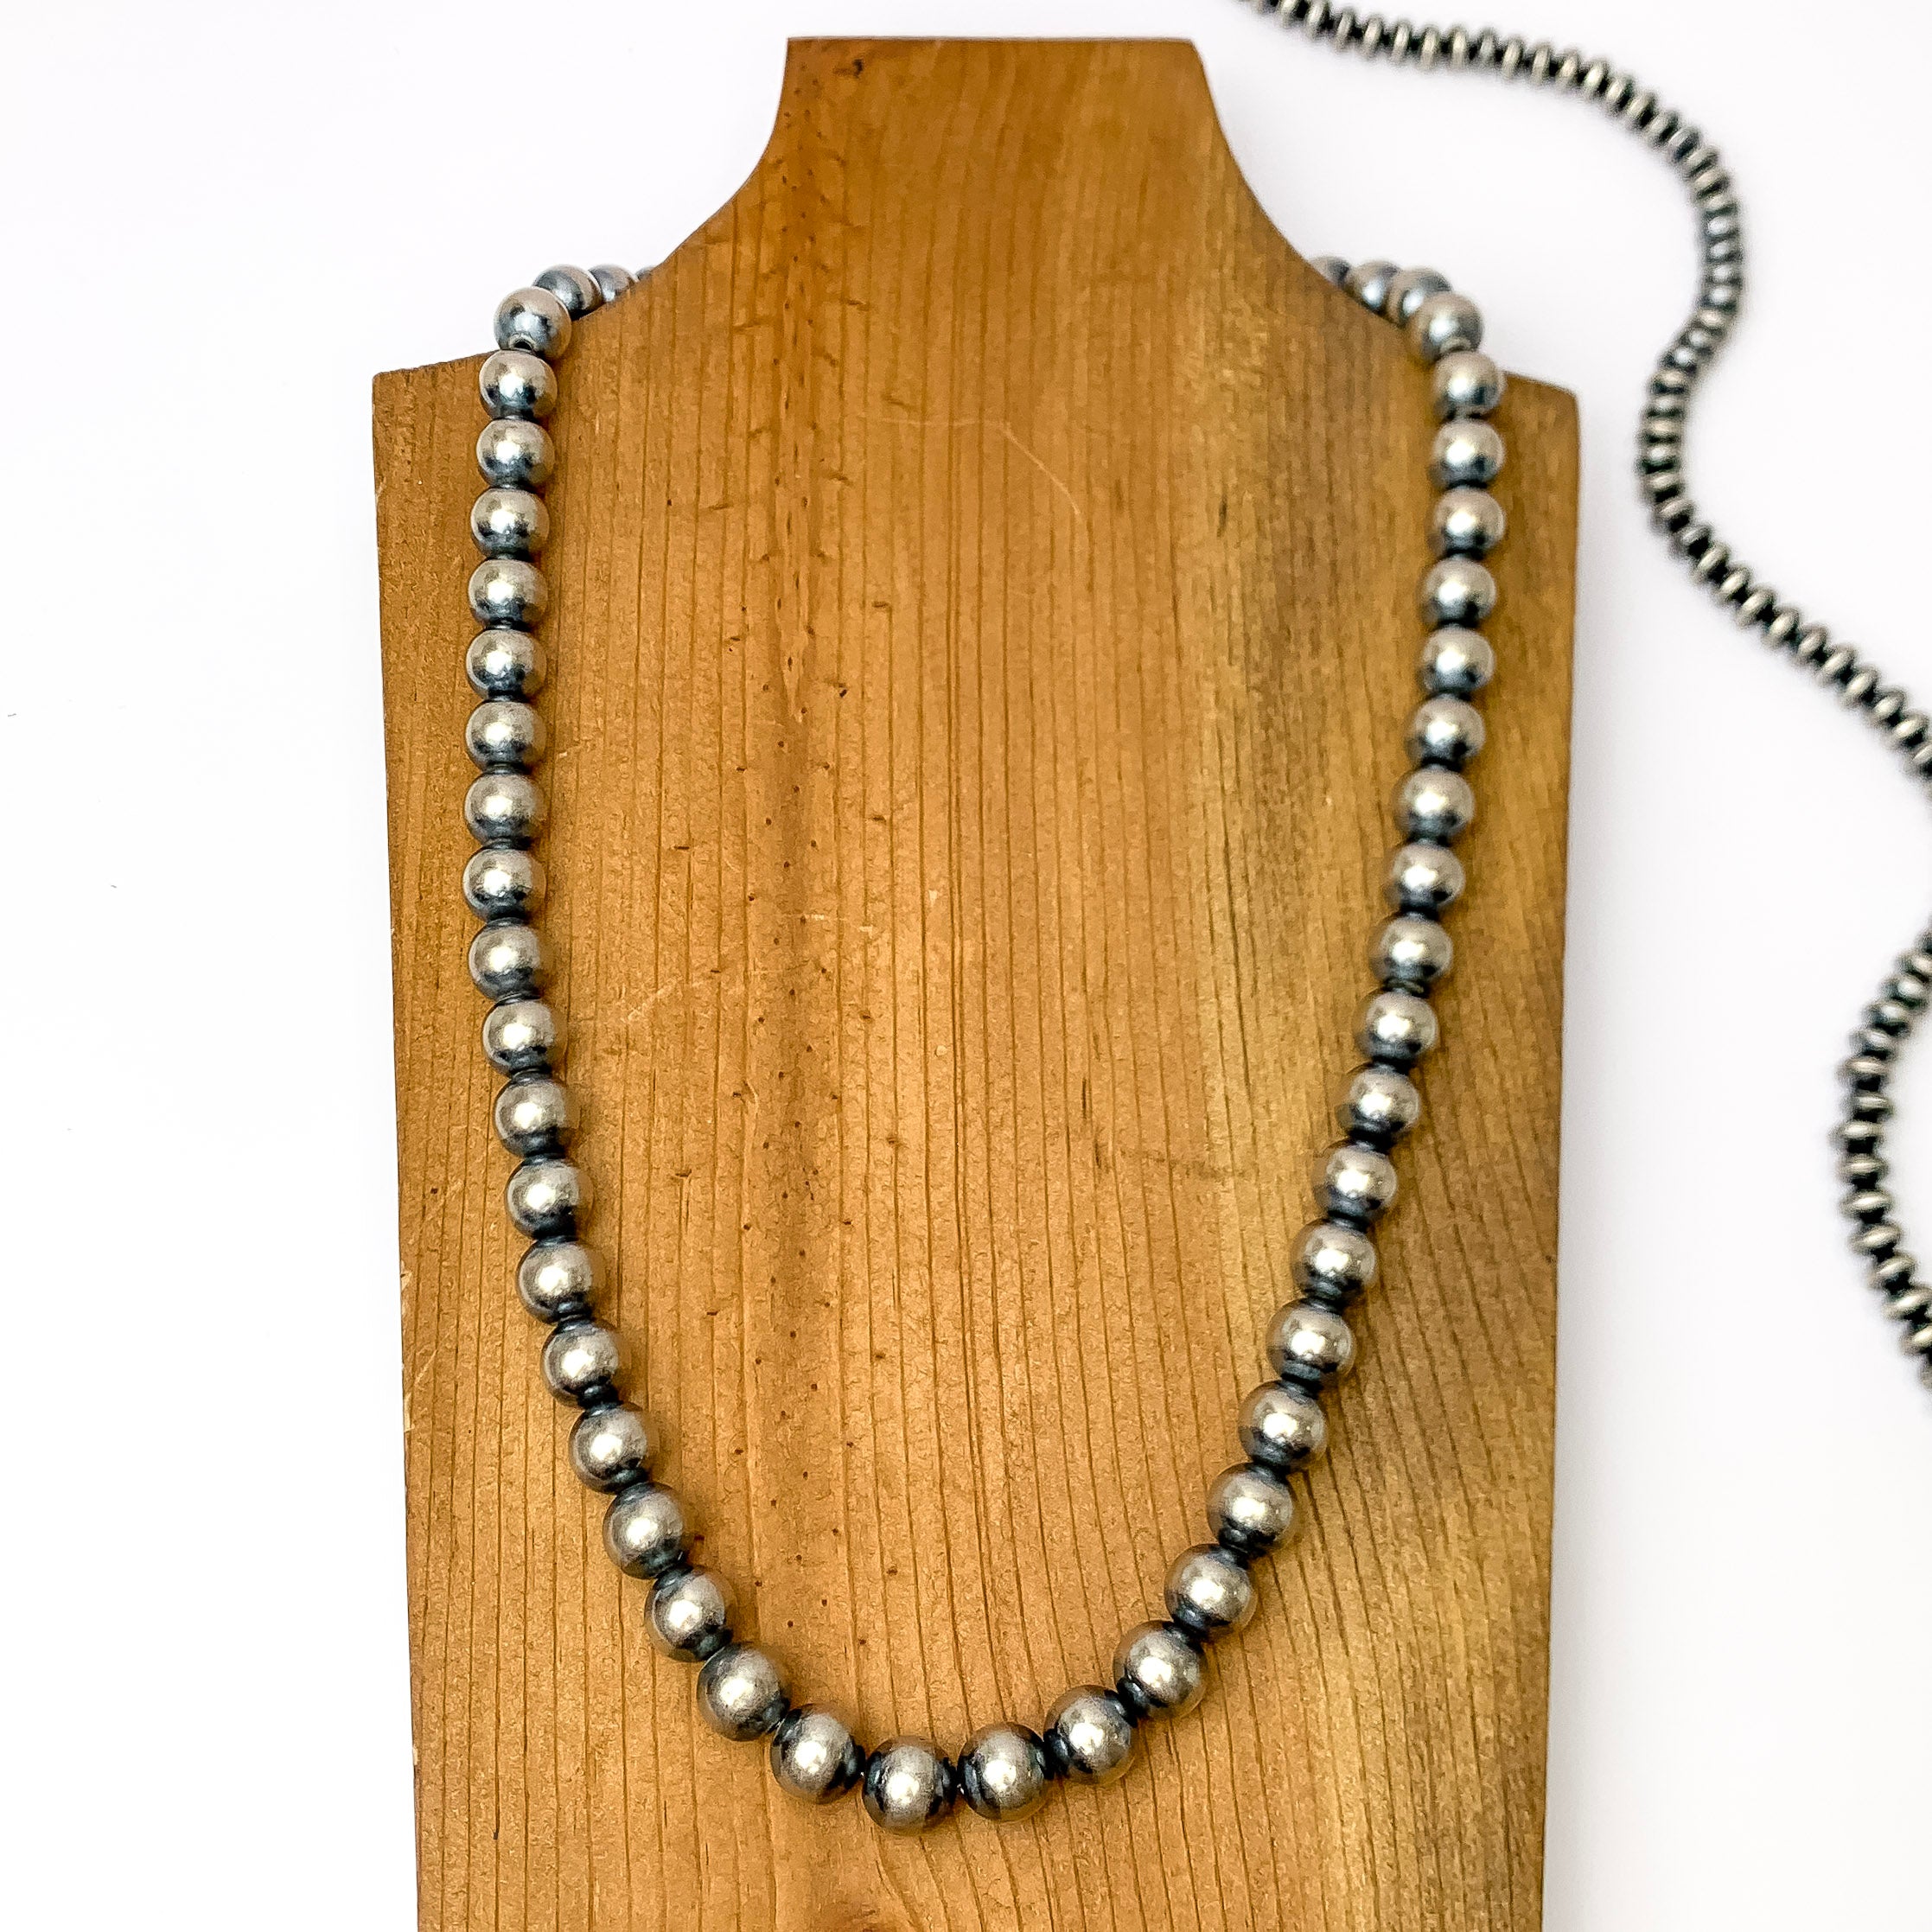 Centered in the picture is a large strand of navajo pearls on a wooden backdrop. 